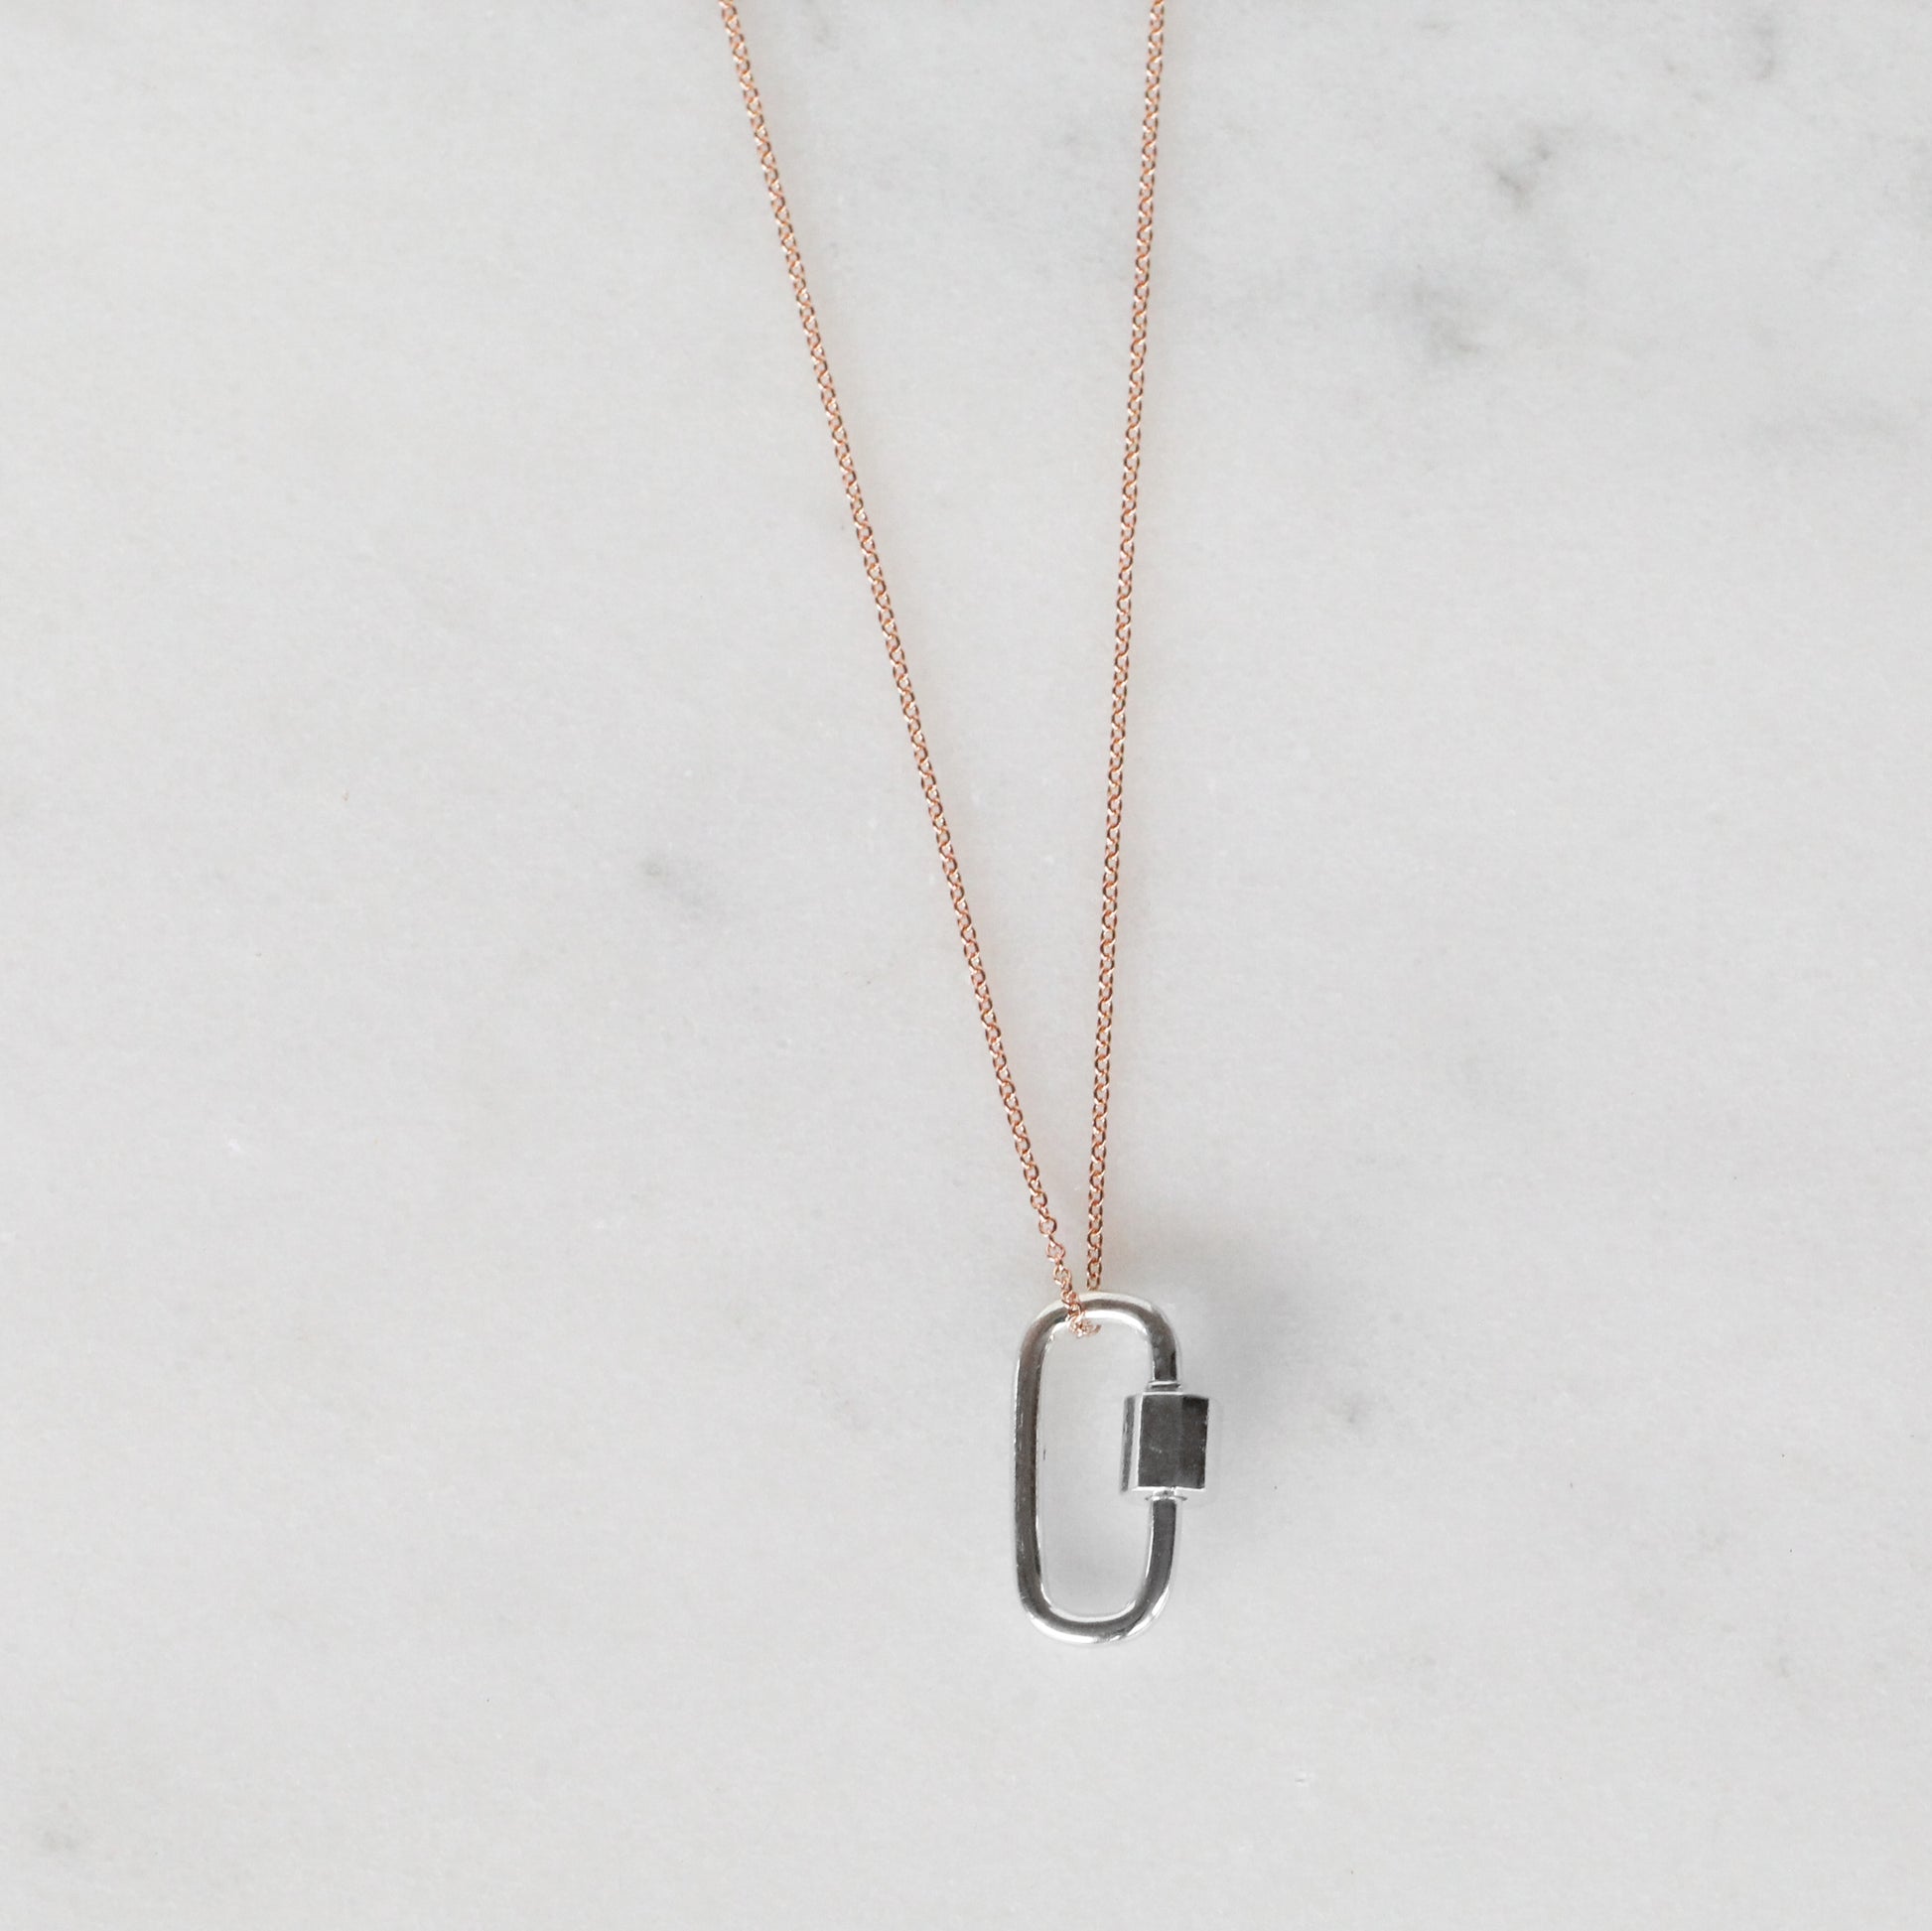 Minimal Cabrera Lock in Sterling Silver - Necklace with 14k Rose